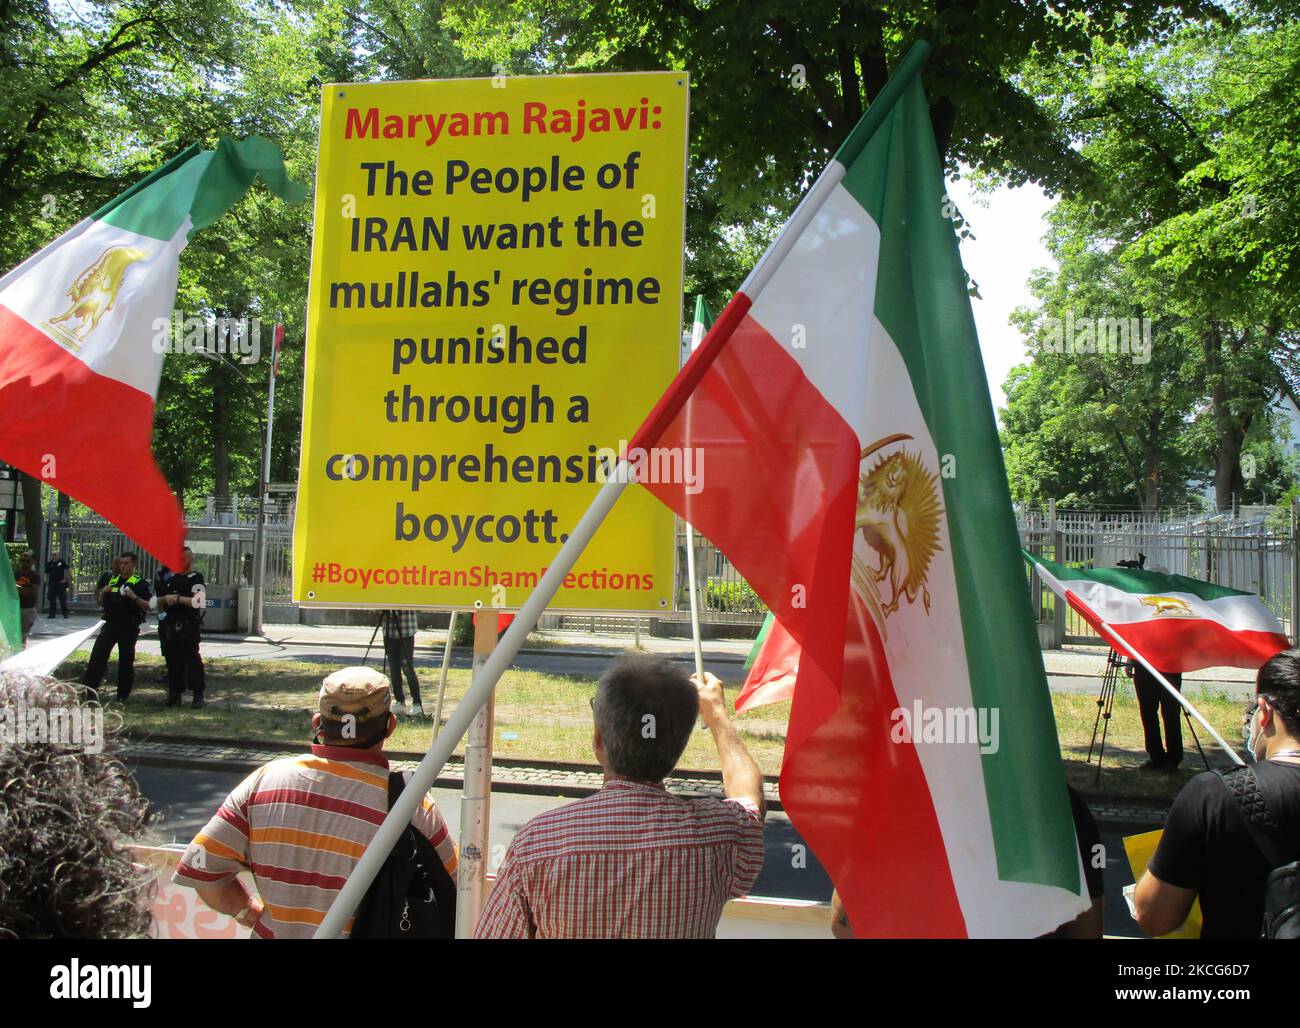 On the eve of the Iran Presidential Election in Iran, Iranian supporters of the NCRI, the main Iranian opposition group, protest outside the Iranian Embassy in Berlin, Germany in June 17, 2021. The protesters have called for the boycott of the election in Iran and condemn Ebrahim Raisi, the expected next Iran President for the massacre of 30,000 political prisoners in 1988. (Photo by Siavosh Hosseini/NurPhoto) Stock Photo